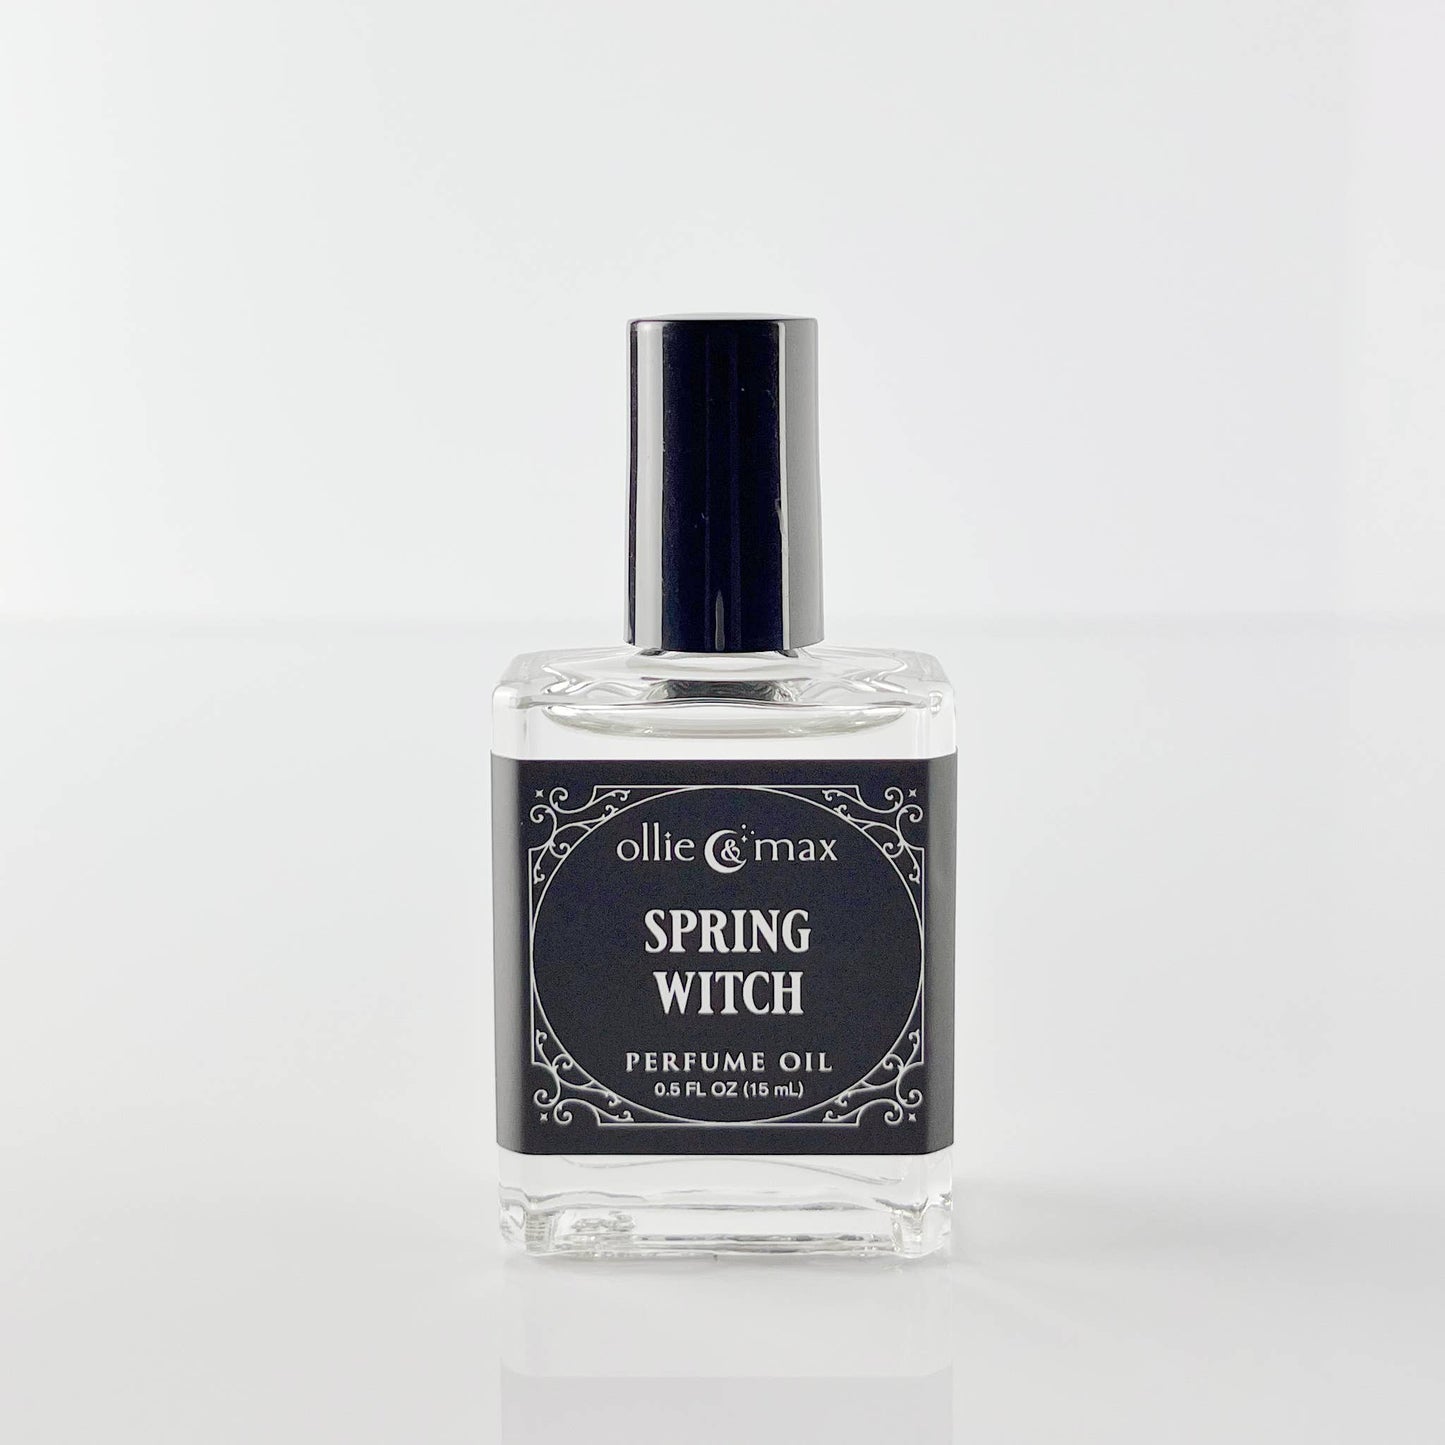 ollie + max soap co - Spring Witch Vegan Perfume Oil